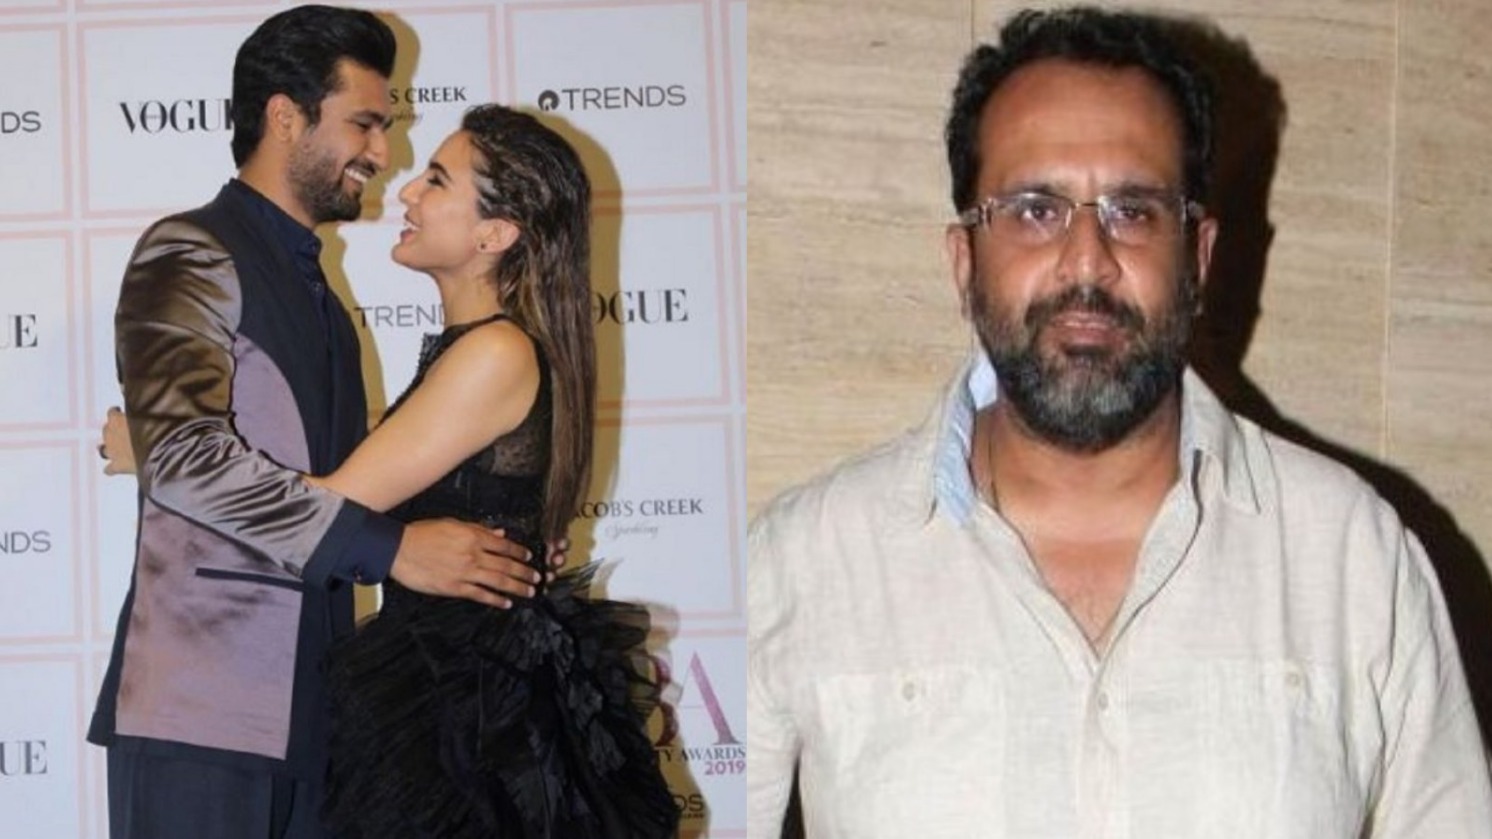 Vicky Kaushal asks Aanand L. Rai, "cast me in your next, please" after watching Atrangi Re, filmmaker replies